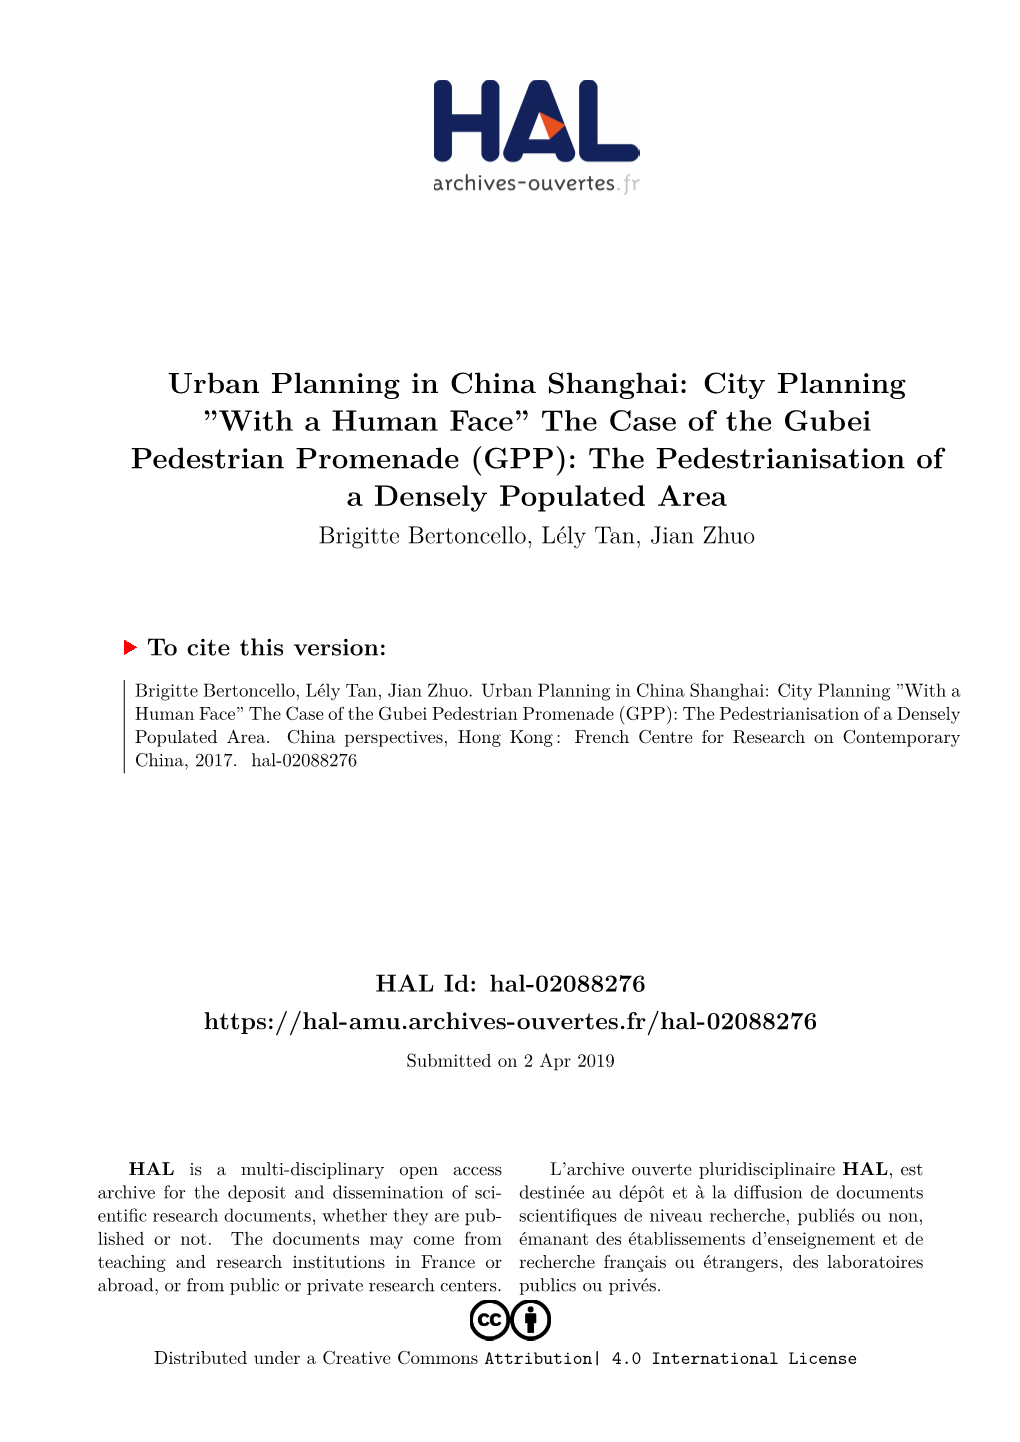 Urban Planning in China Shanghai: City Planning ''With a Human Face'